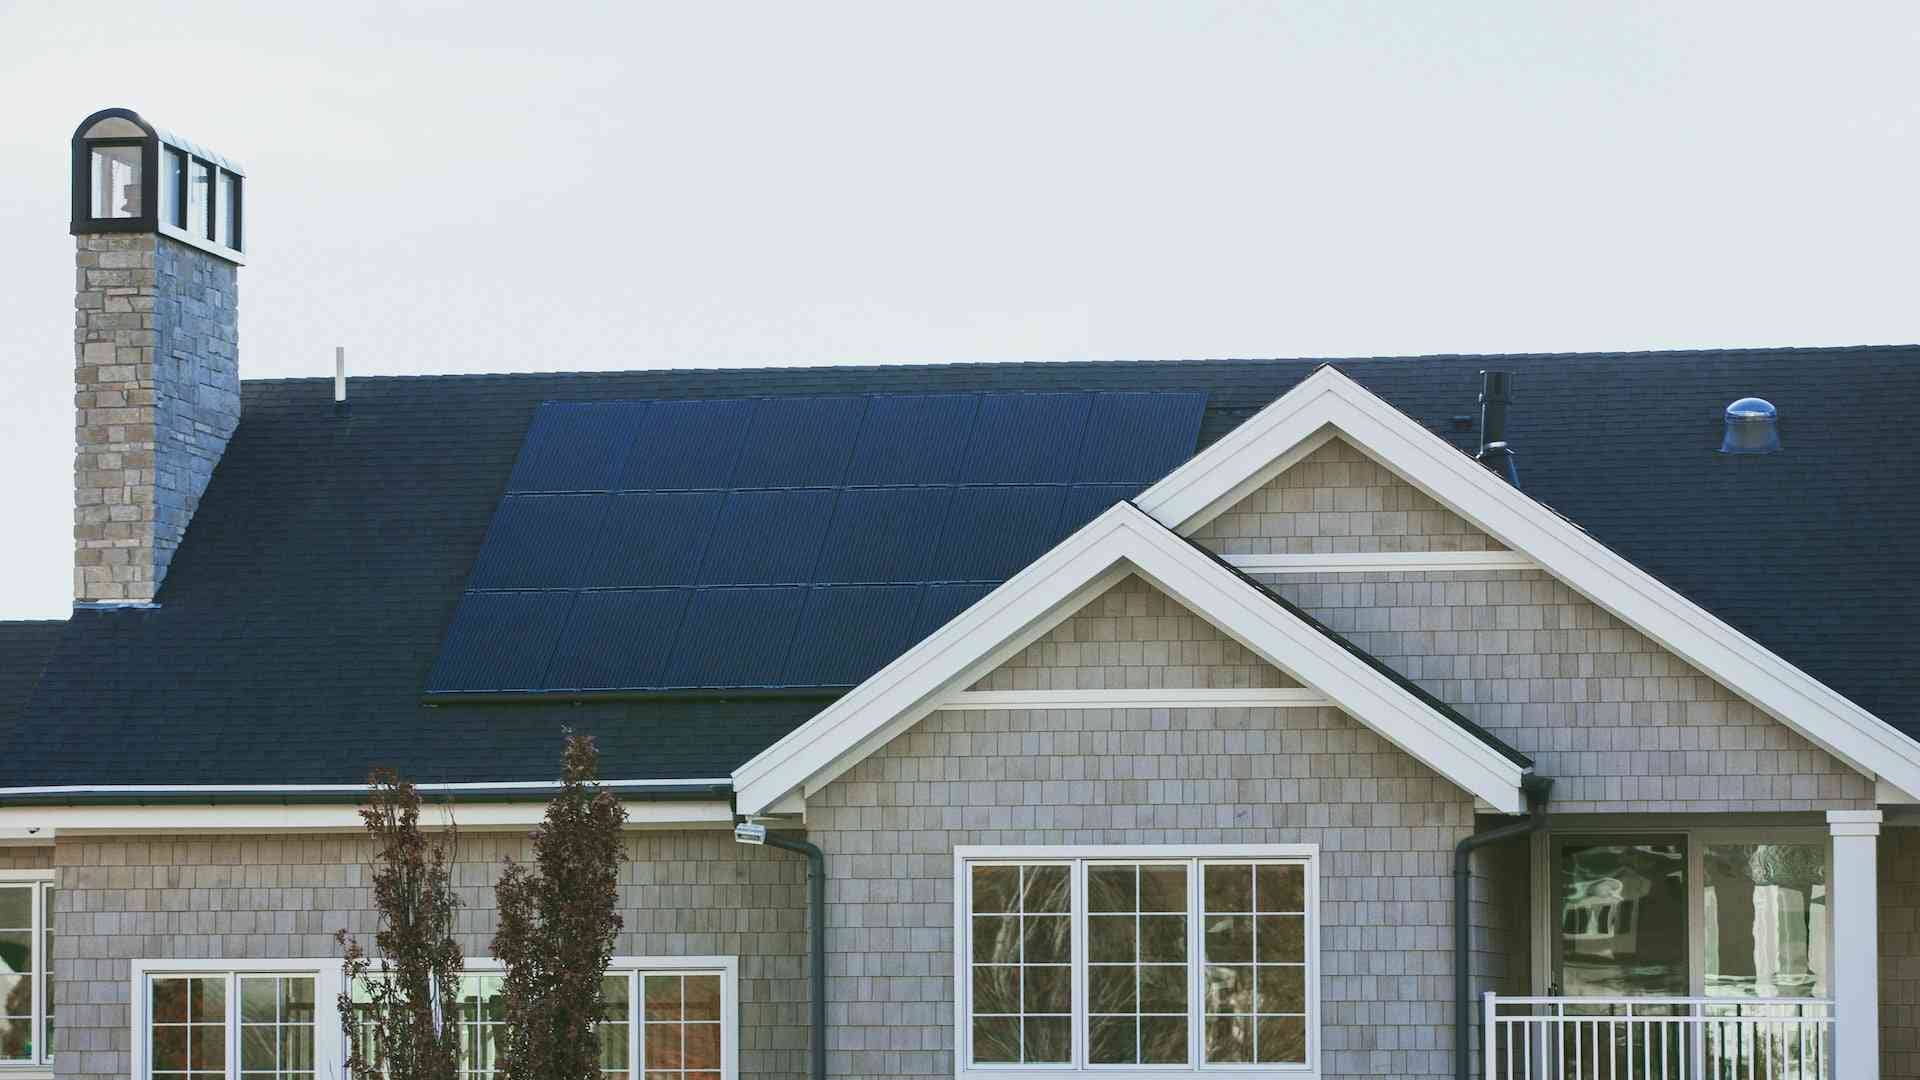 Residential home with solar panel installation by American Home Contractors in East Hanover, NJ